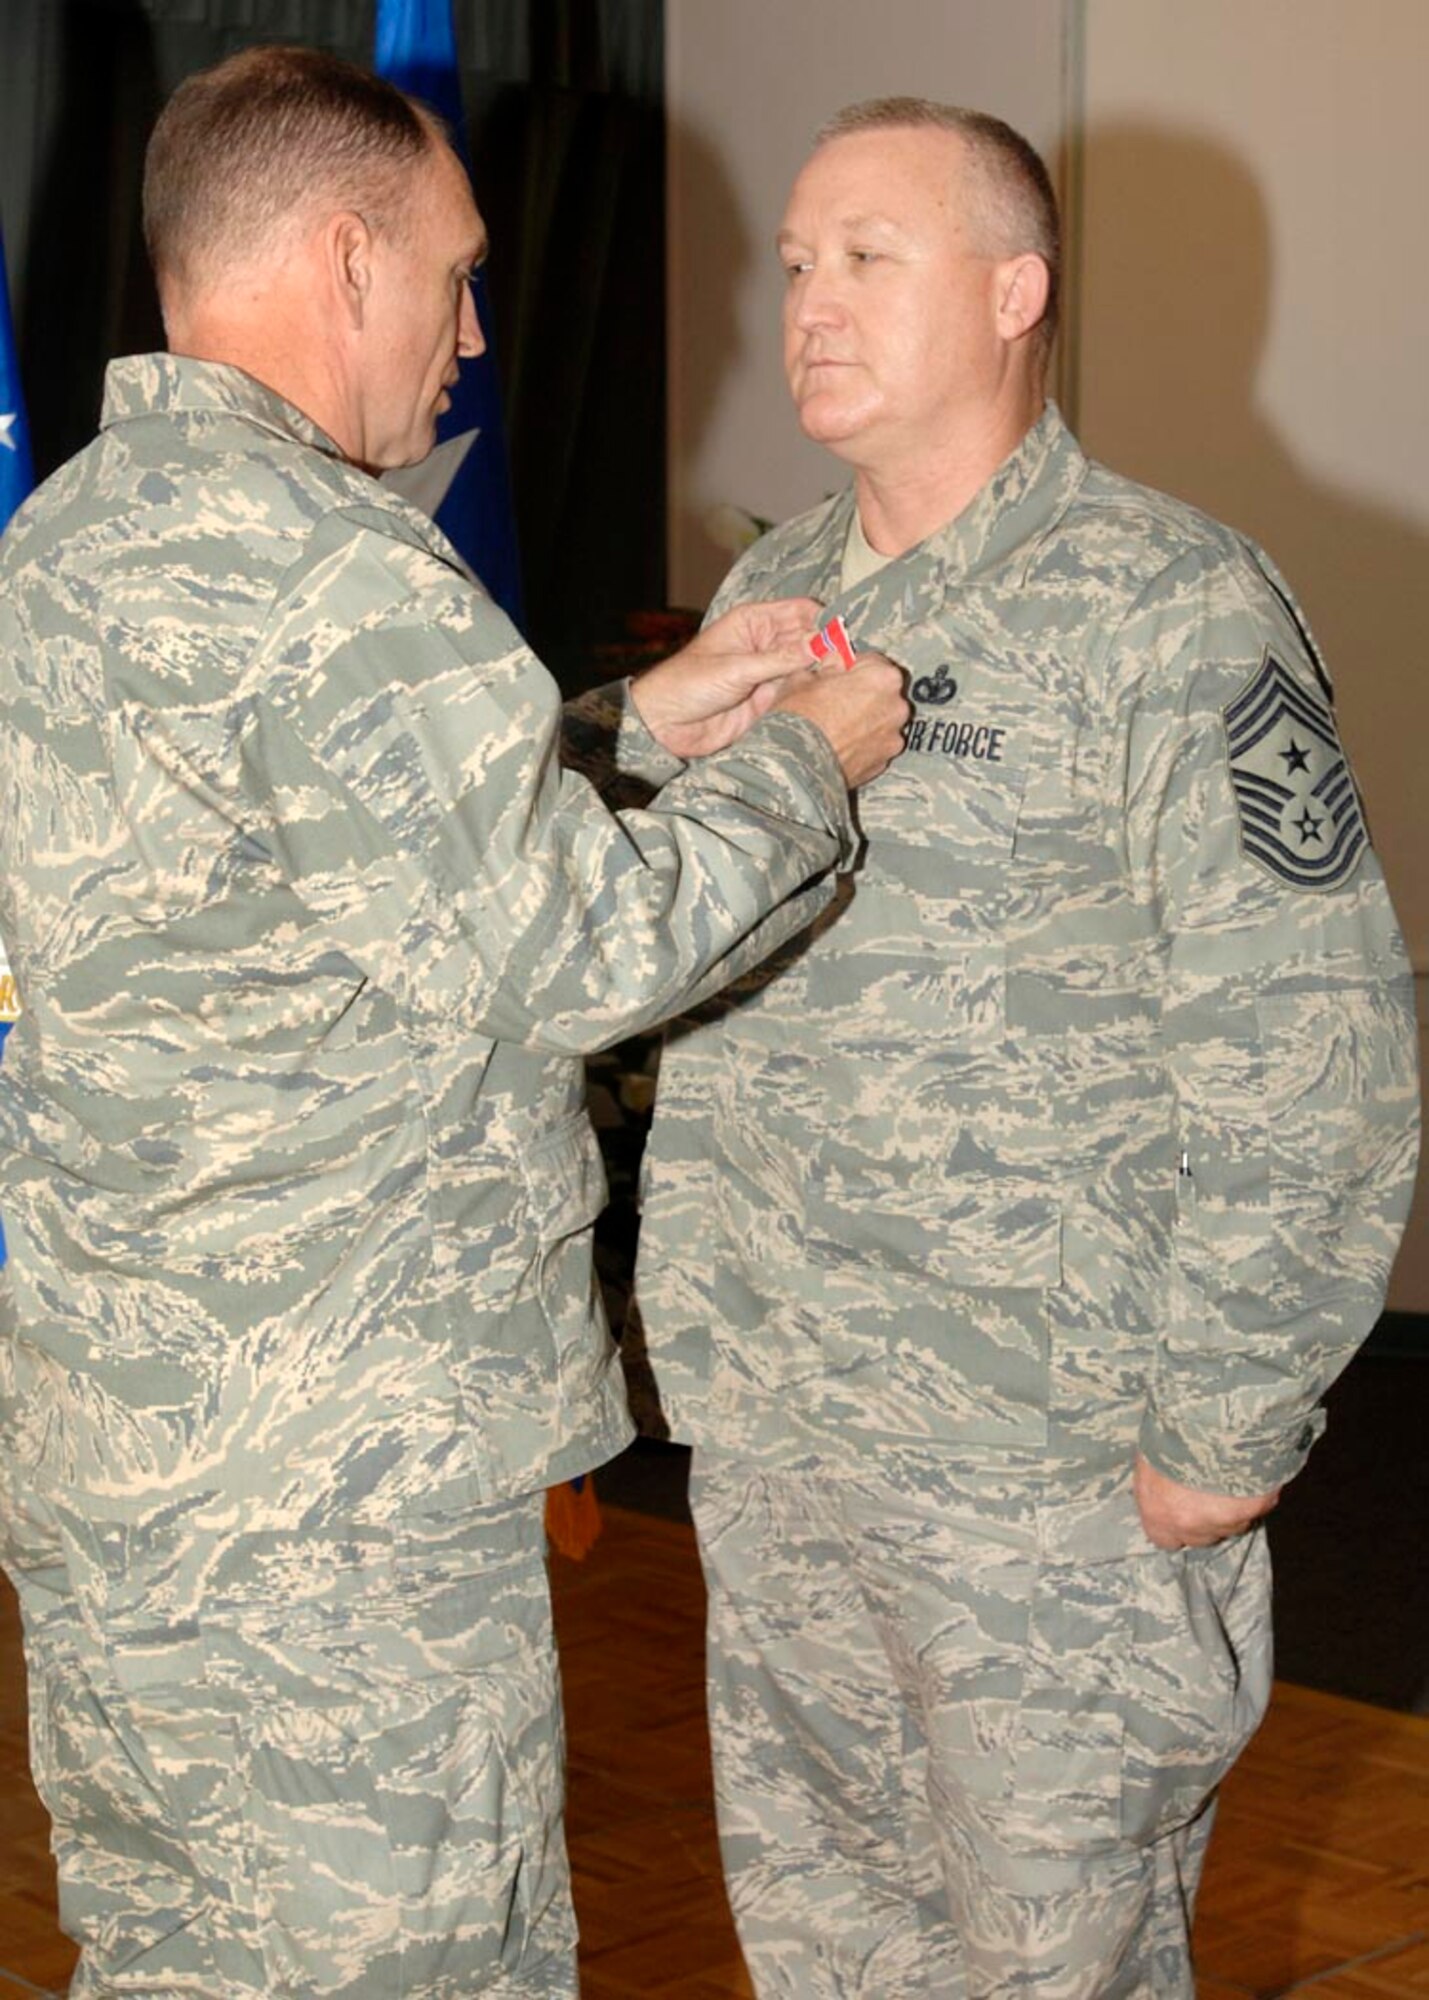 Chief Master Sgt. Paul Wheeler, Air Force District of Washington command chief, receives the Bronze Star from AFDW Commander Maj. Gen. Ralph Jodice during a ceremony at Andrews AFB, Md., Oct. 2. Chief Wheeler earned the medal for service with the 332nd Air Expeditionary Wing, engaged in combat operations at Balad Air Base, Iraq. During his time with the 332nd, the chief was the command chief to more than 26,000 Airmen located at five major air bases in Iraq. During his year in theater, the chief made more than 90 site visits across more than 10,000 miles of hostile terrain to meet with Airmen he served.  (USAF photo by Senior Airman Melissa Stonecipher)